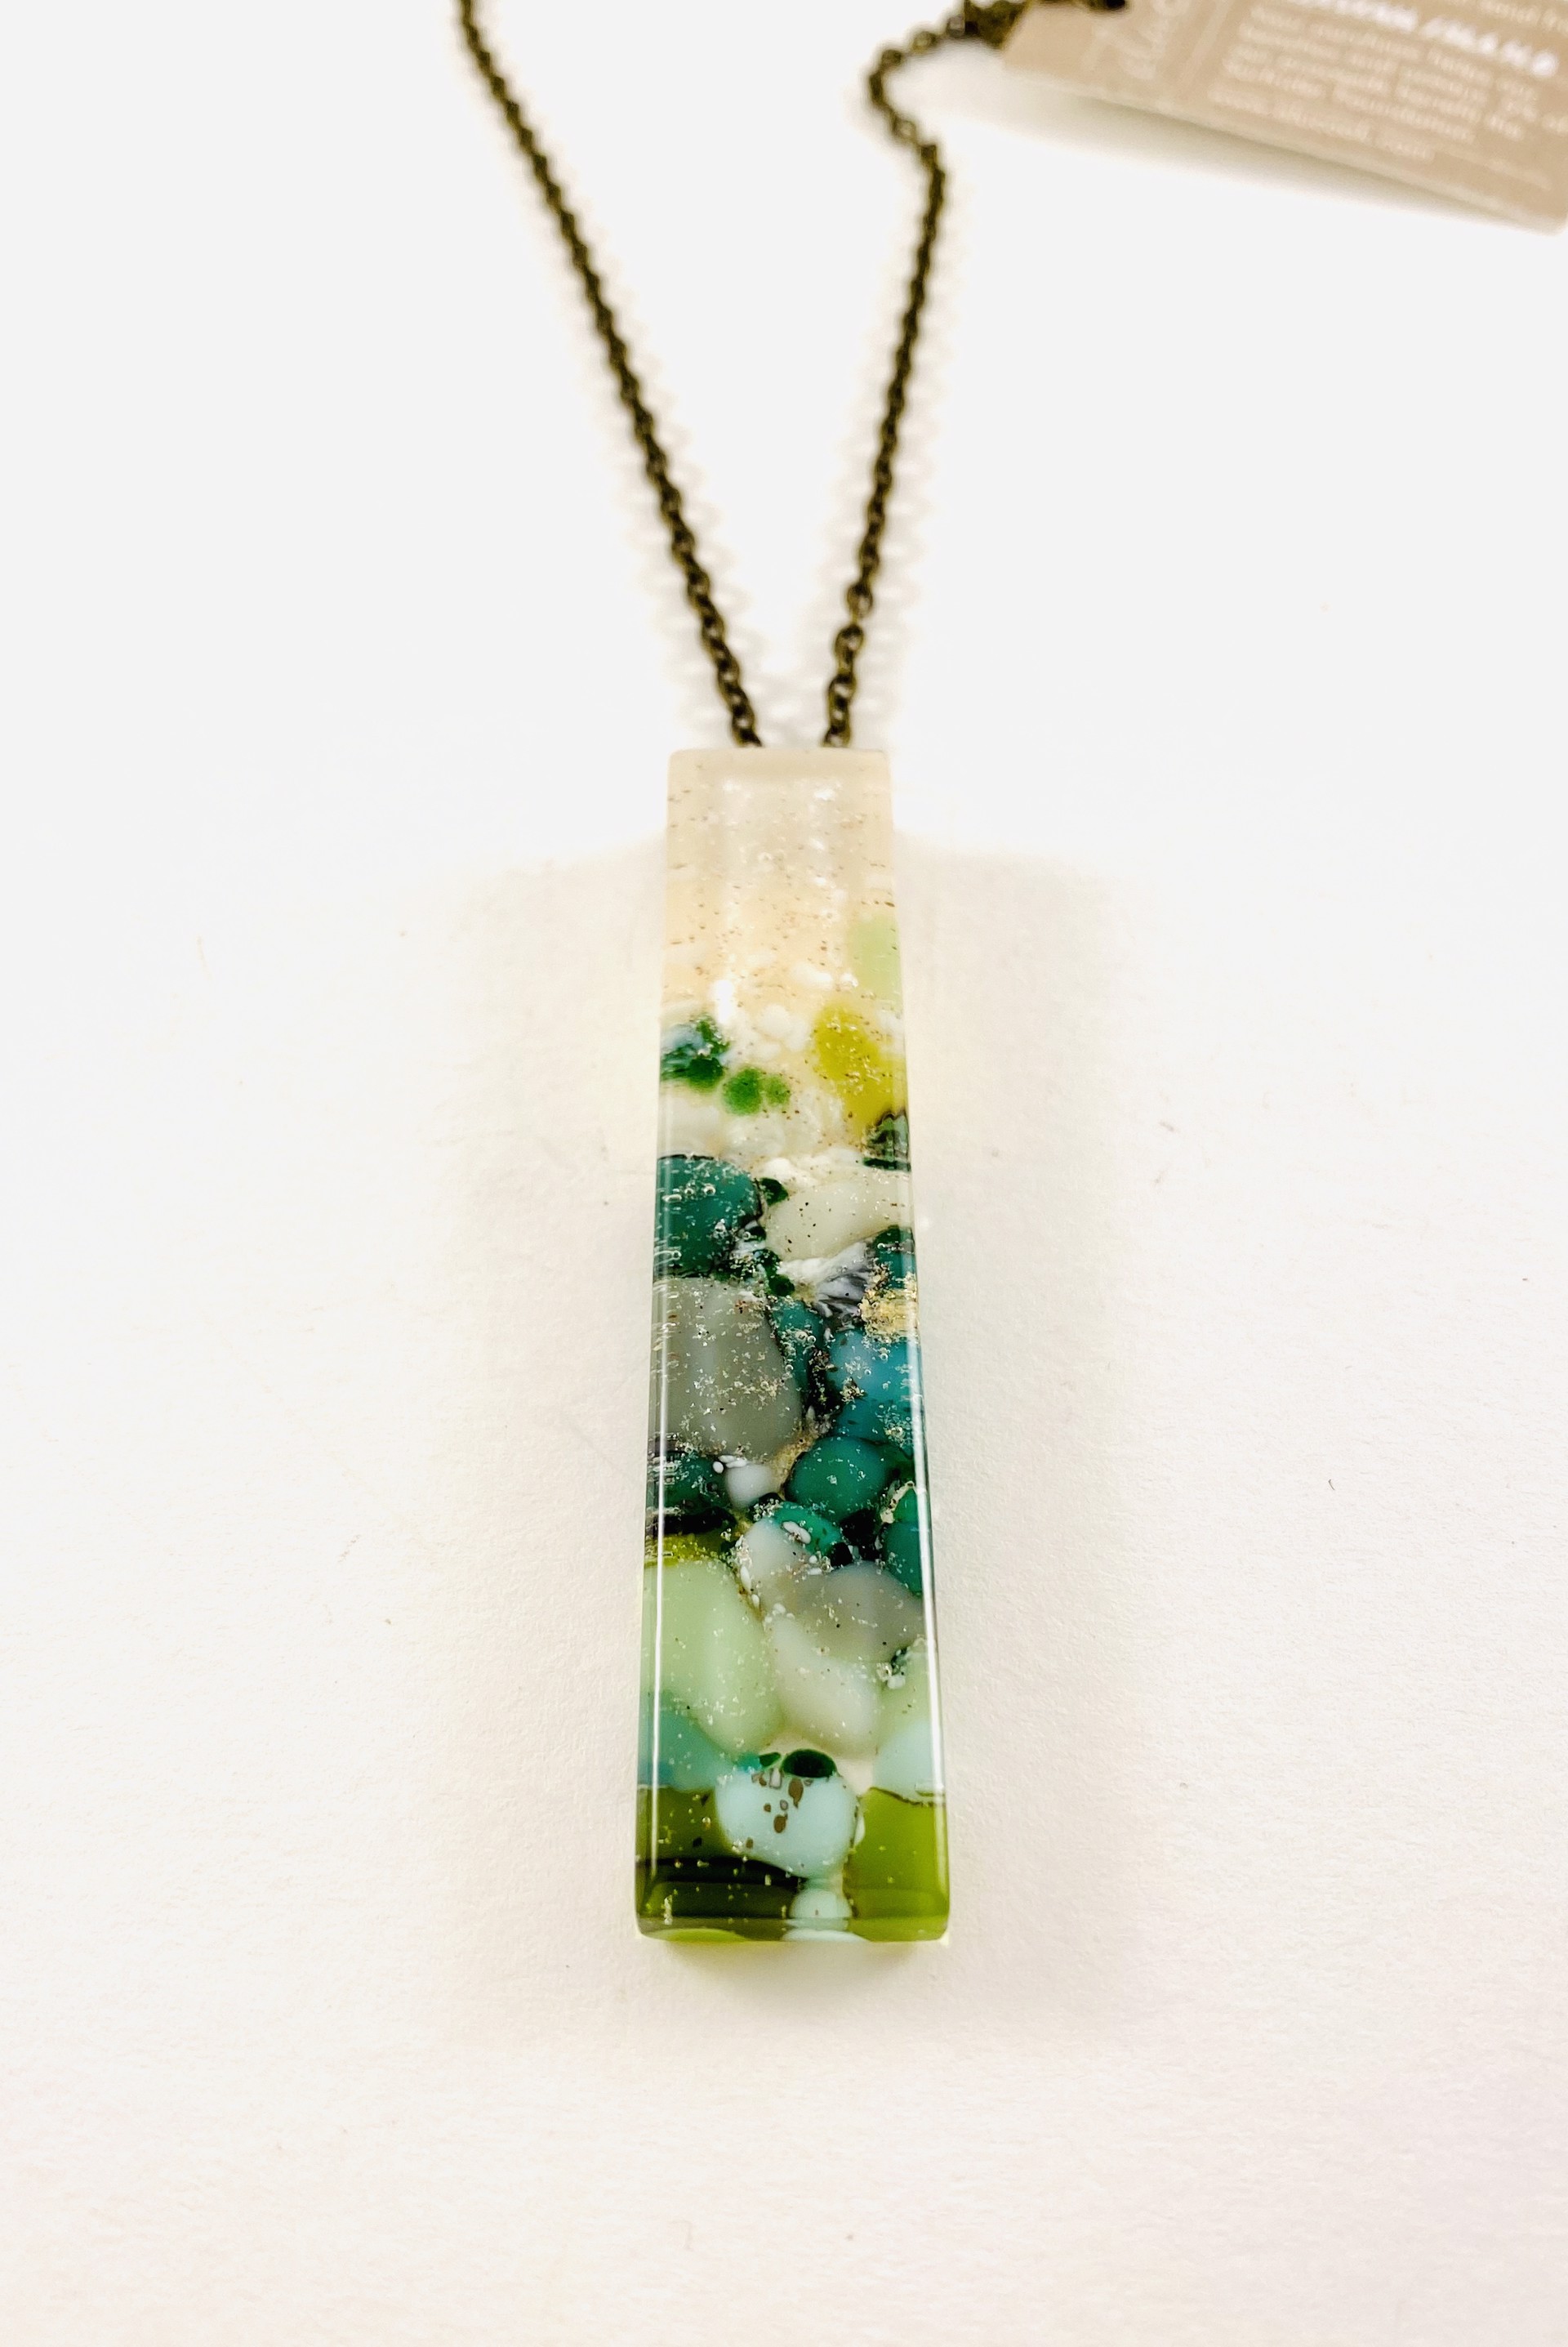 3w “Beachwalk” 30 inch Necklace by Emily Cook